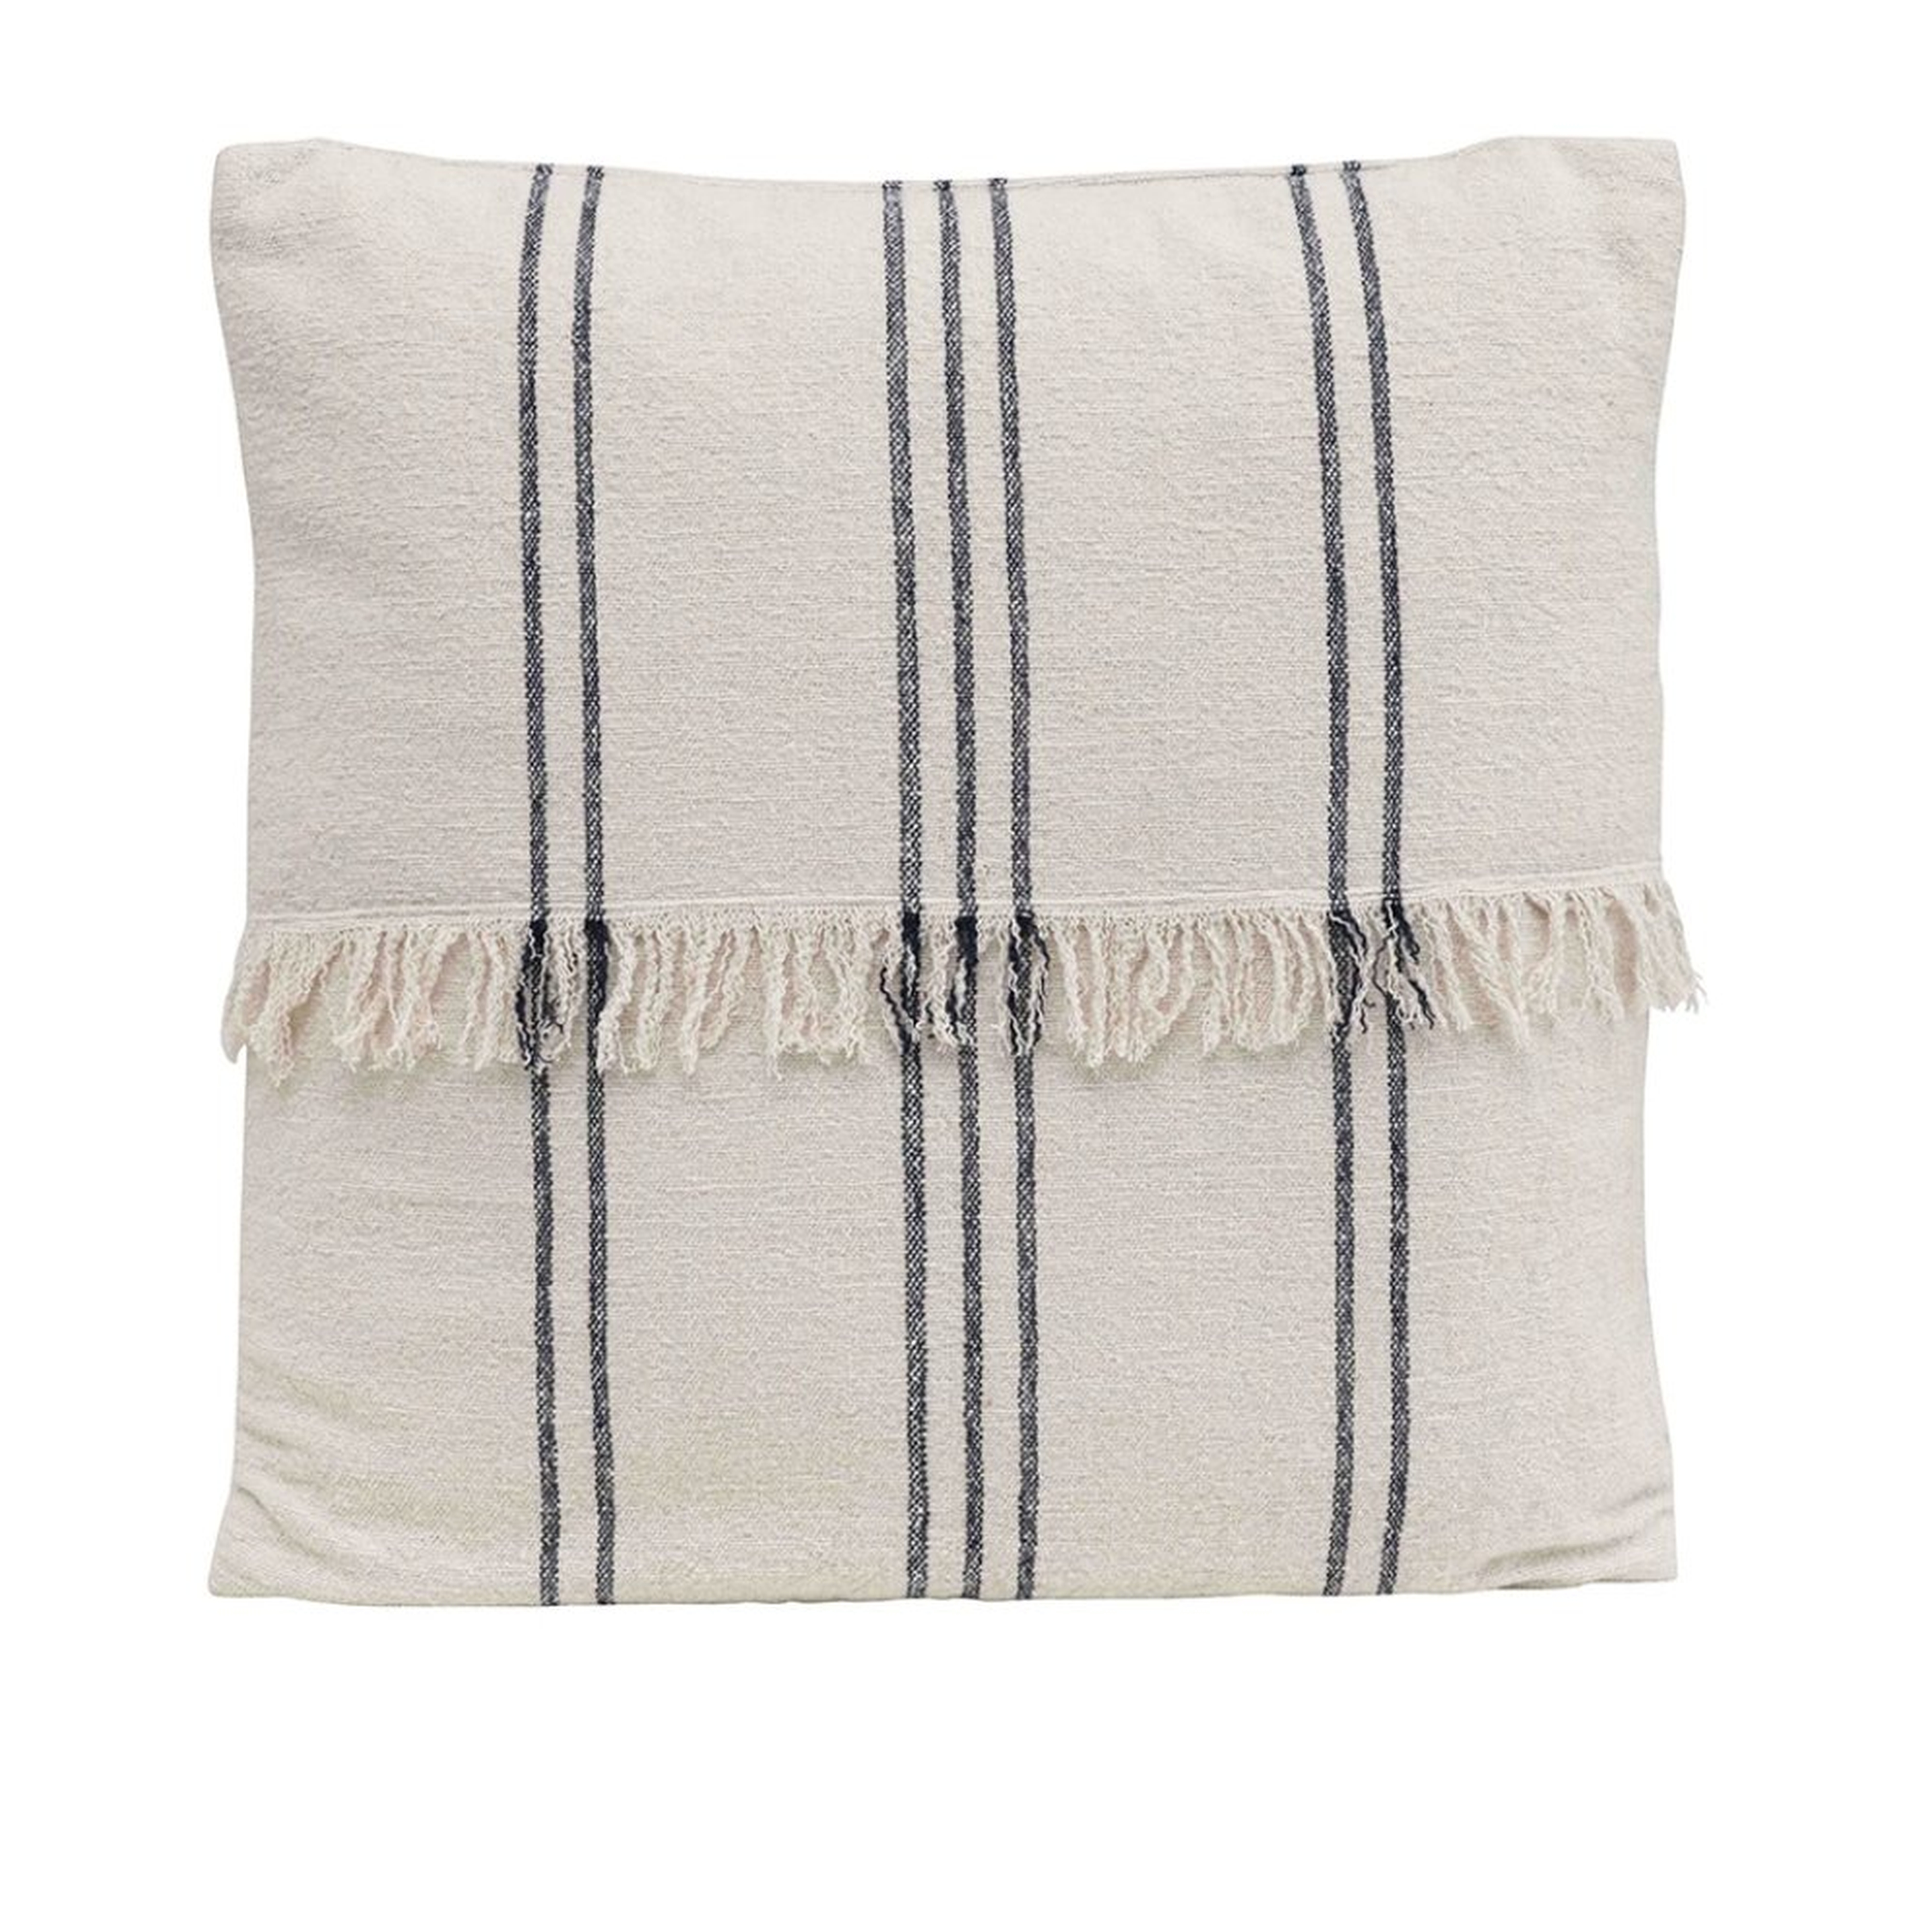 DISCONTINUED - Olema Pillow - Cove Goods